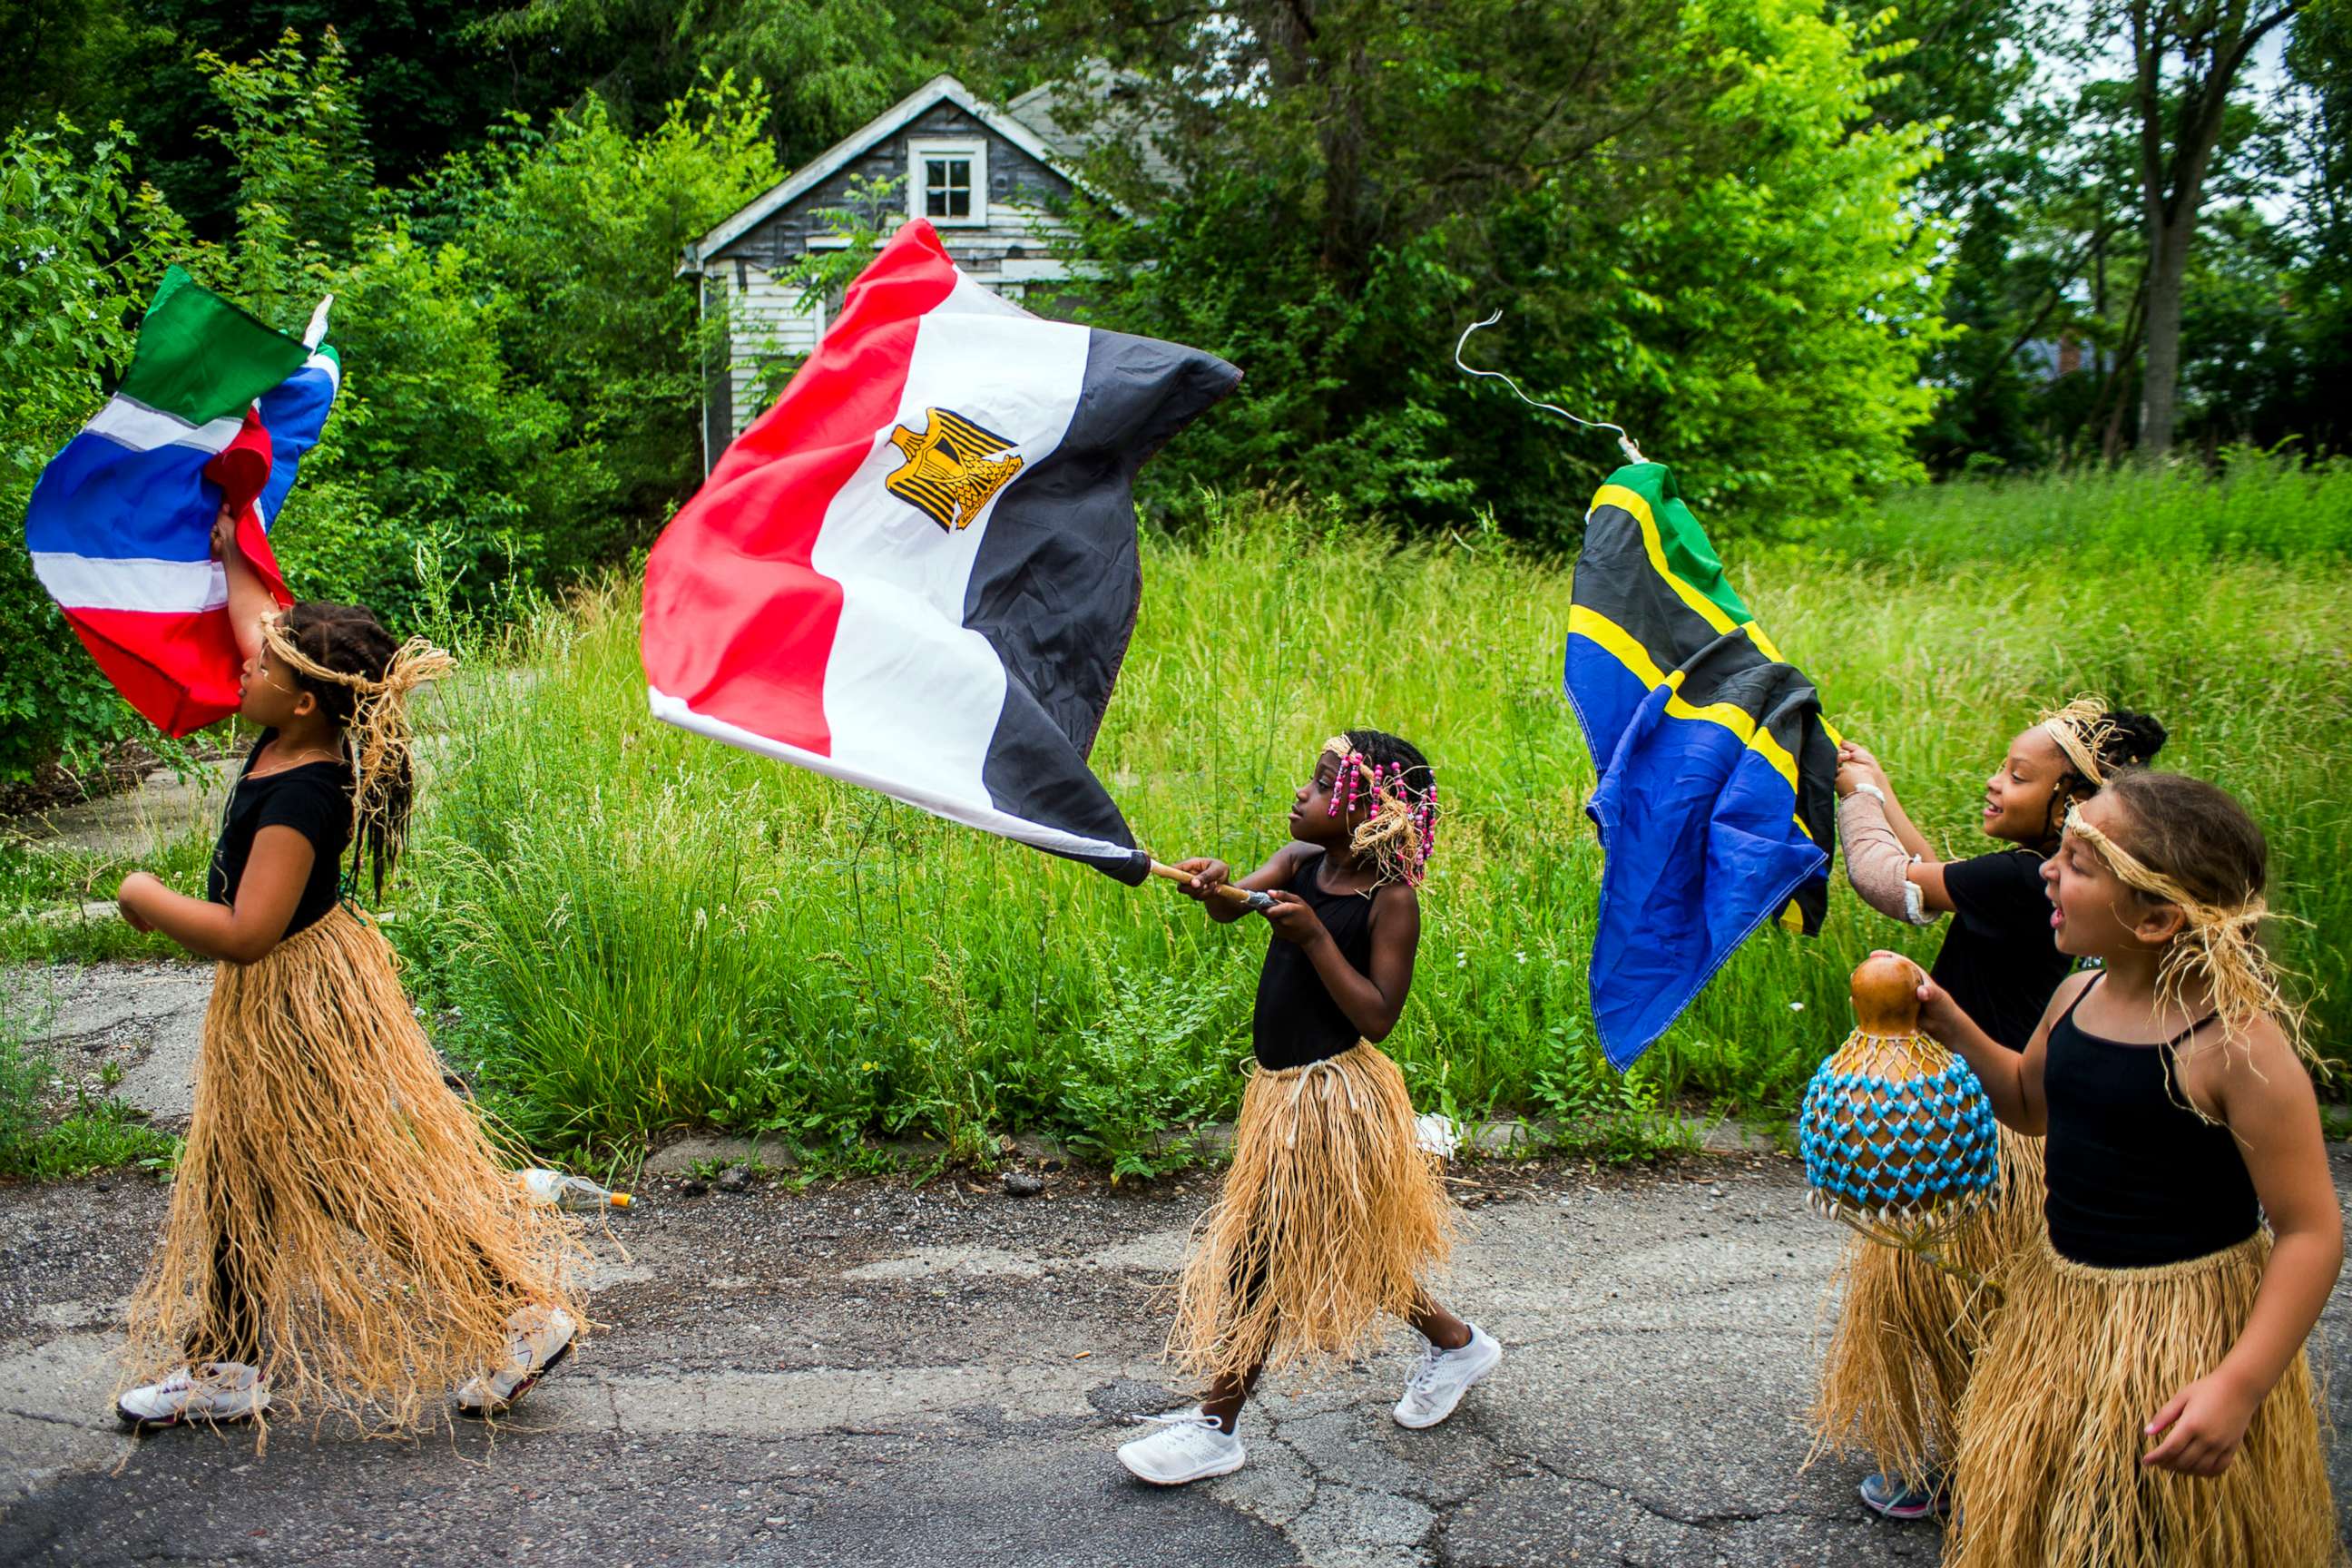 PHOTO: In this June 19, 2018, file photo, girls wave flags as they march along Pasadena Avenue in a parade from Max Brandon Park to University Park, celebrating Juneteenth in Flint, Mich.